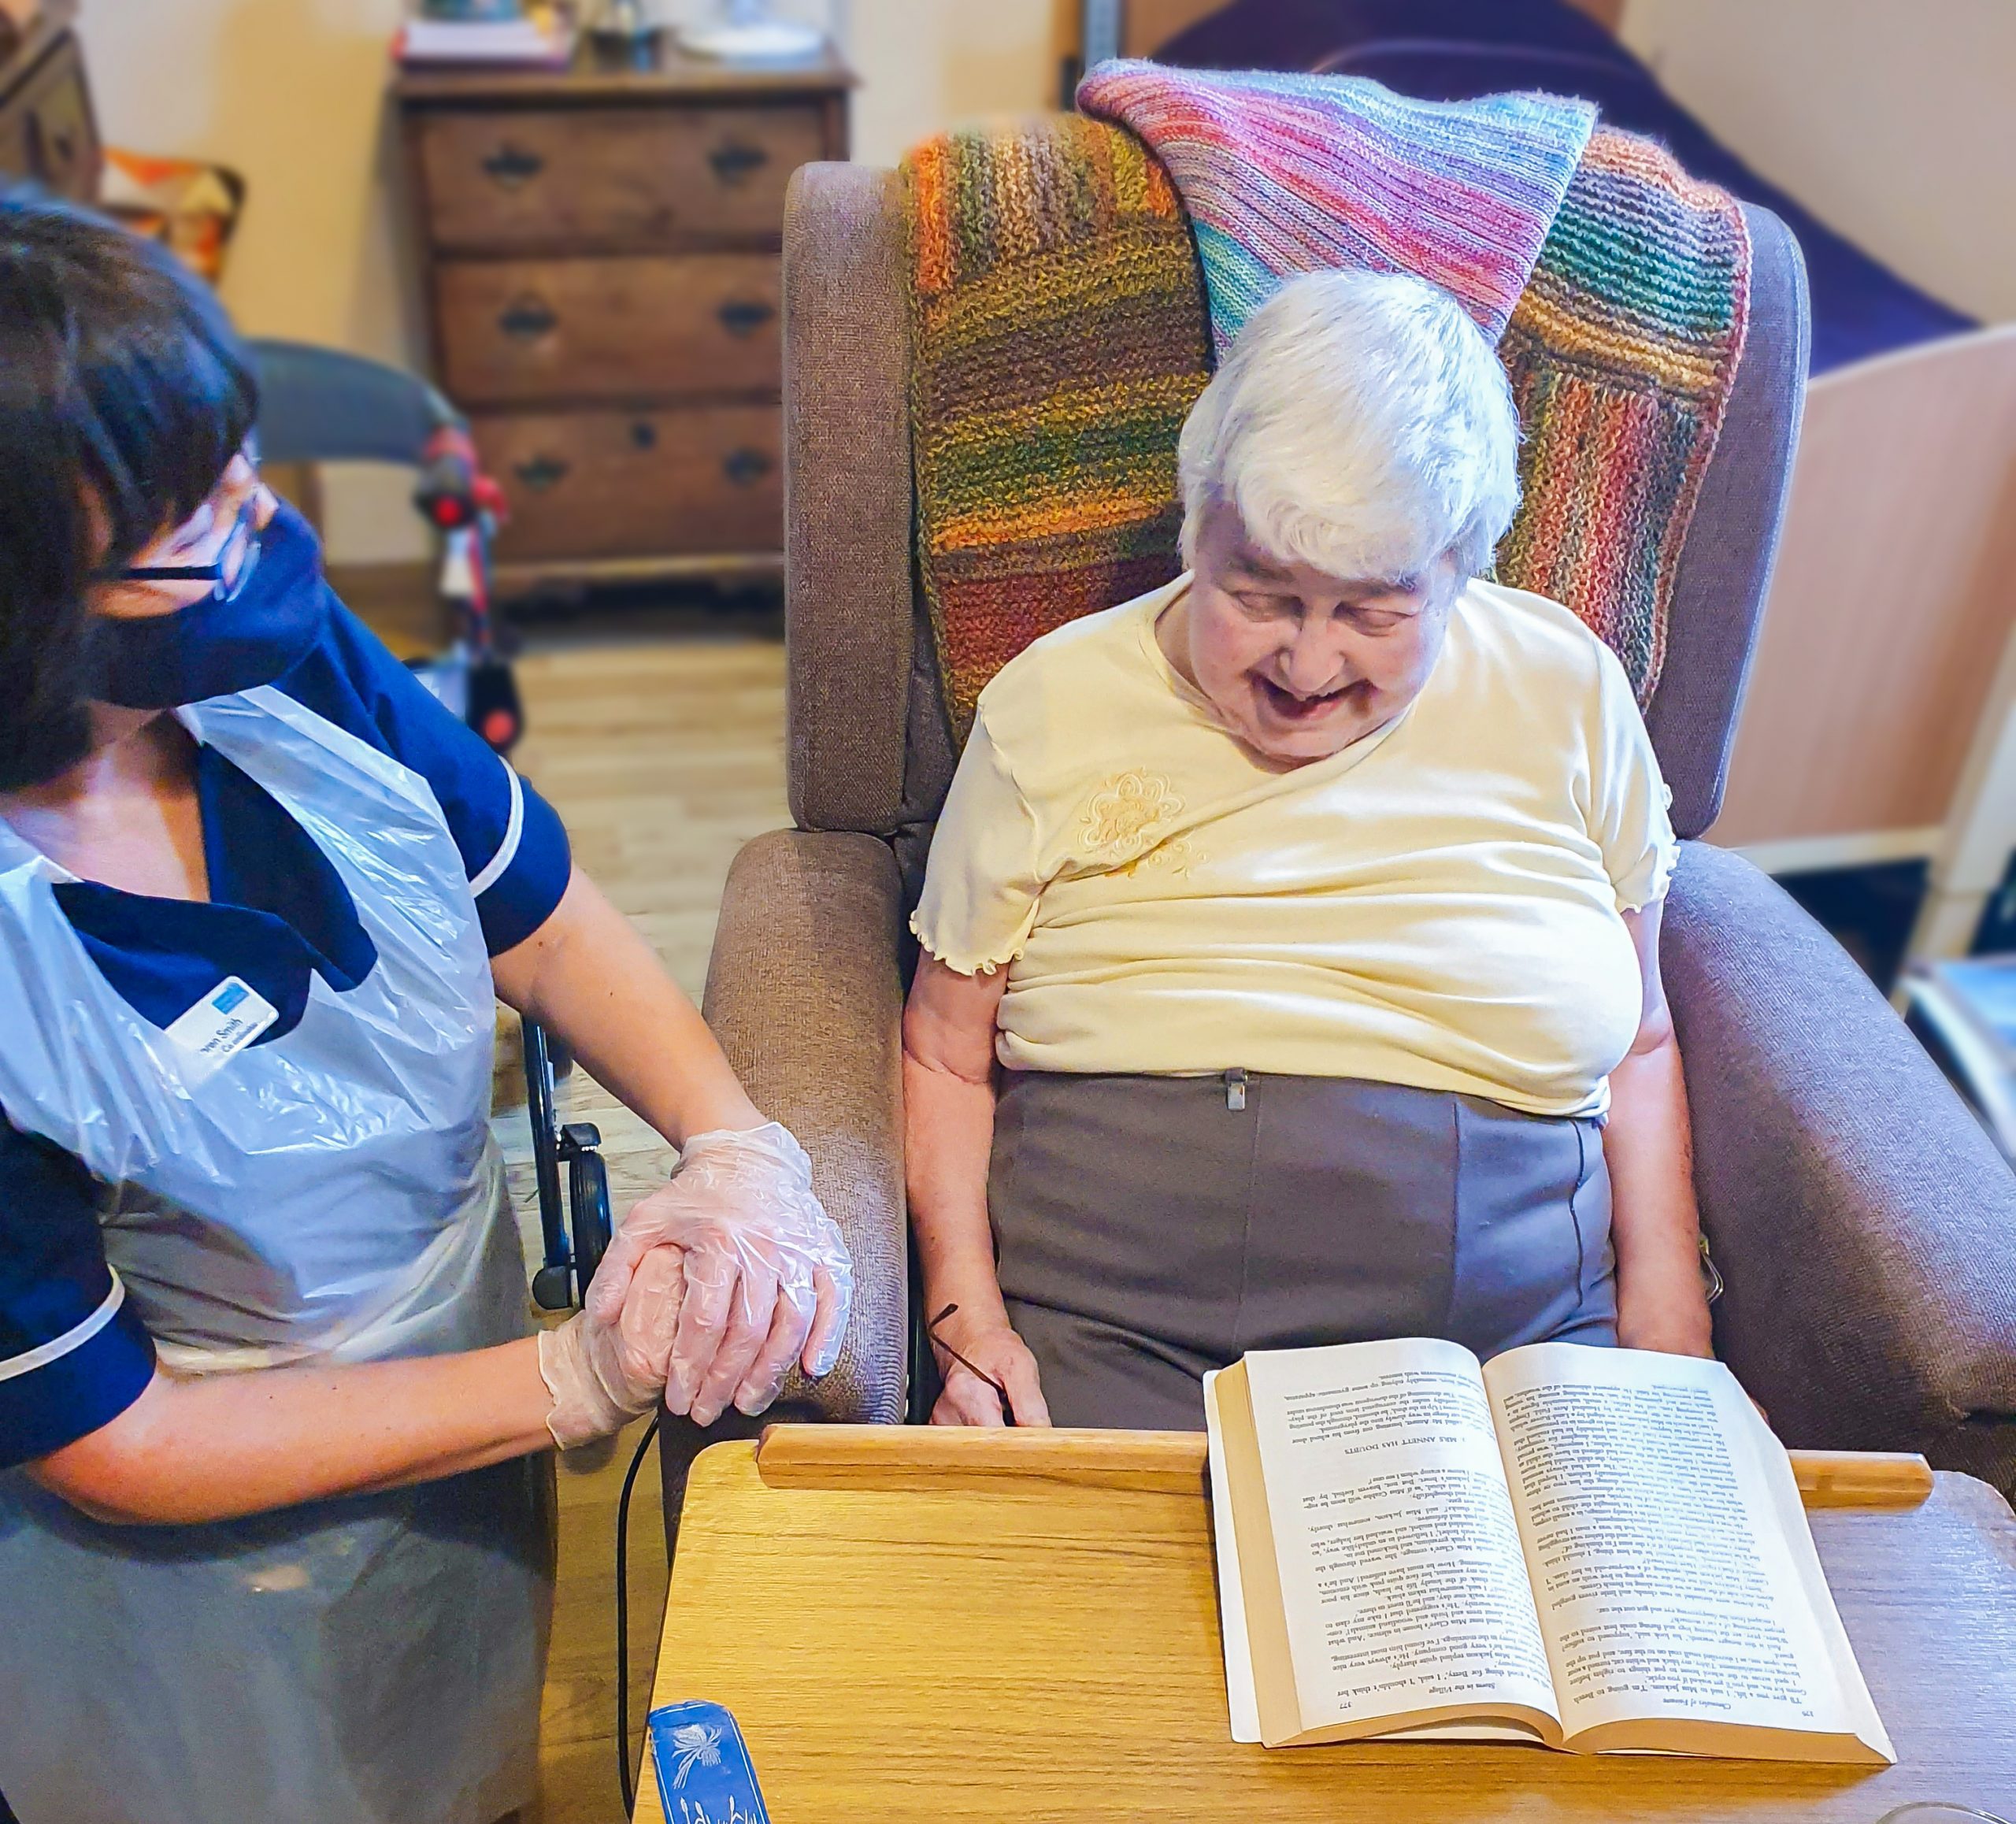 Malvern care home's activity coordinator talking to a resident